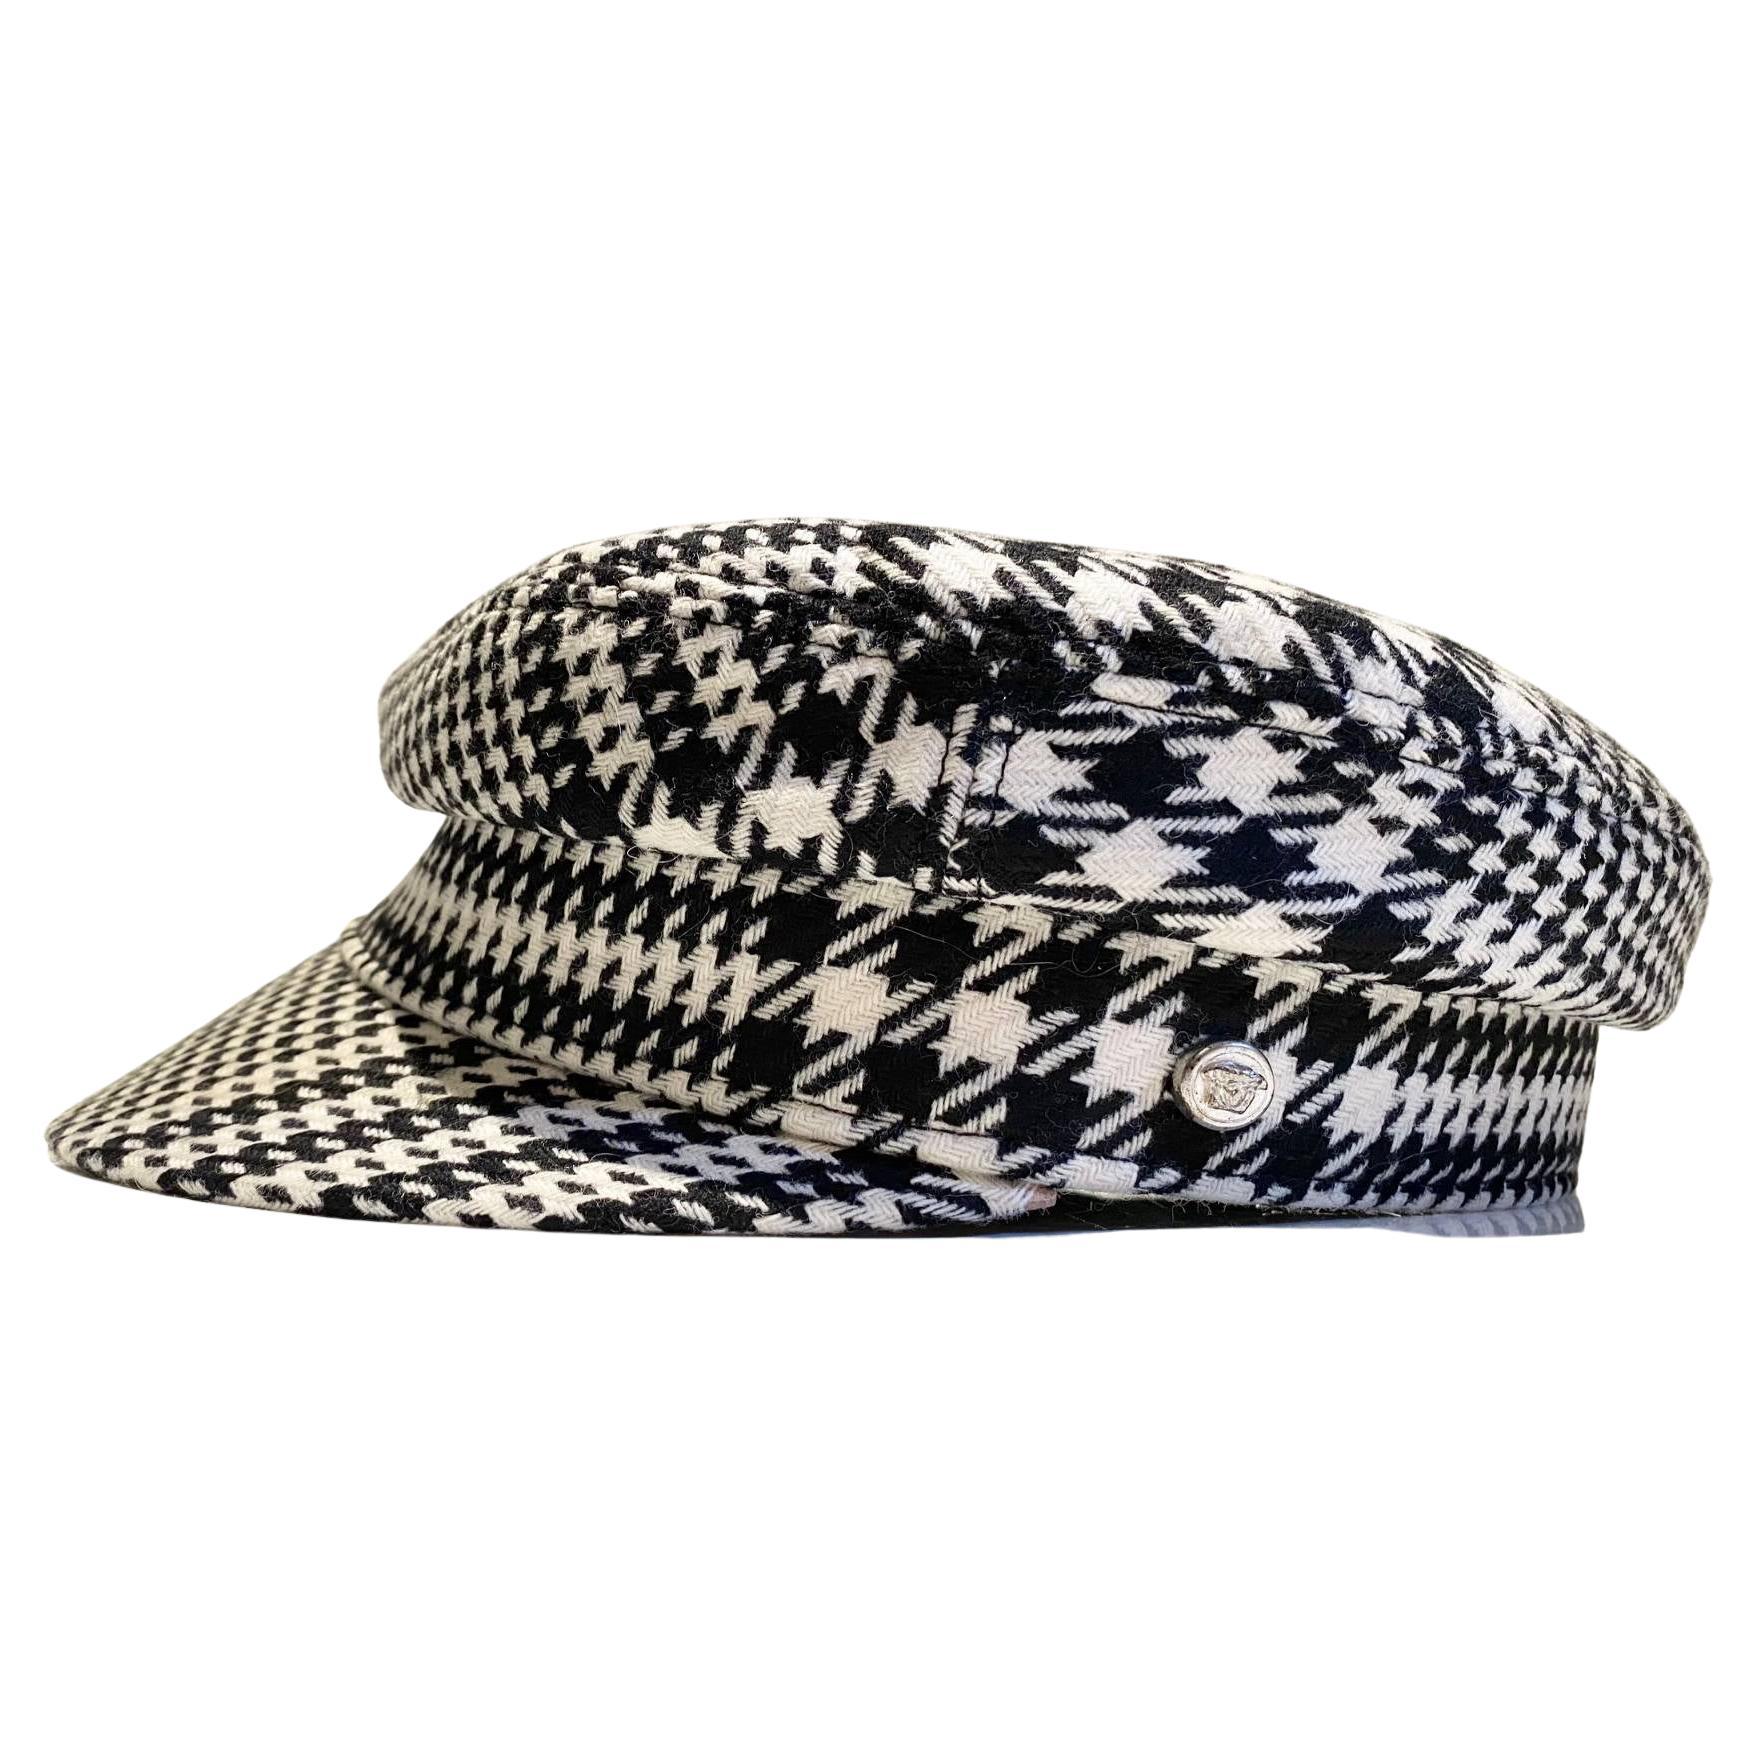 Gianni Versace Black and White Houndstooth flat cap, 100% wool. Made in Italy 

A timeless addition to any outfit, this classic Gianni Versace flat cap exudes sophistication. Constructed with pure wool, this stylishly houndstooth-patterned piece